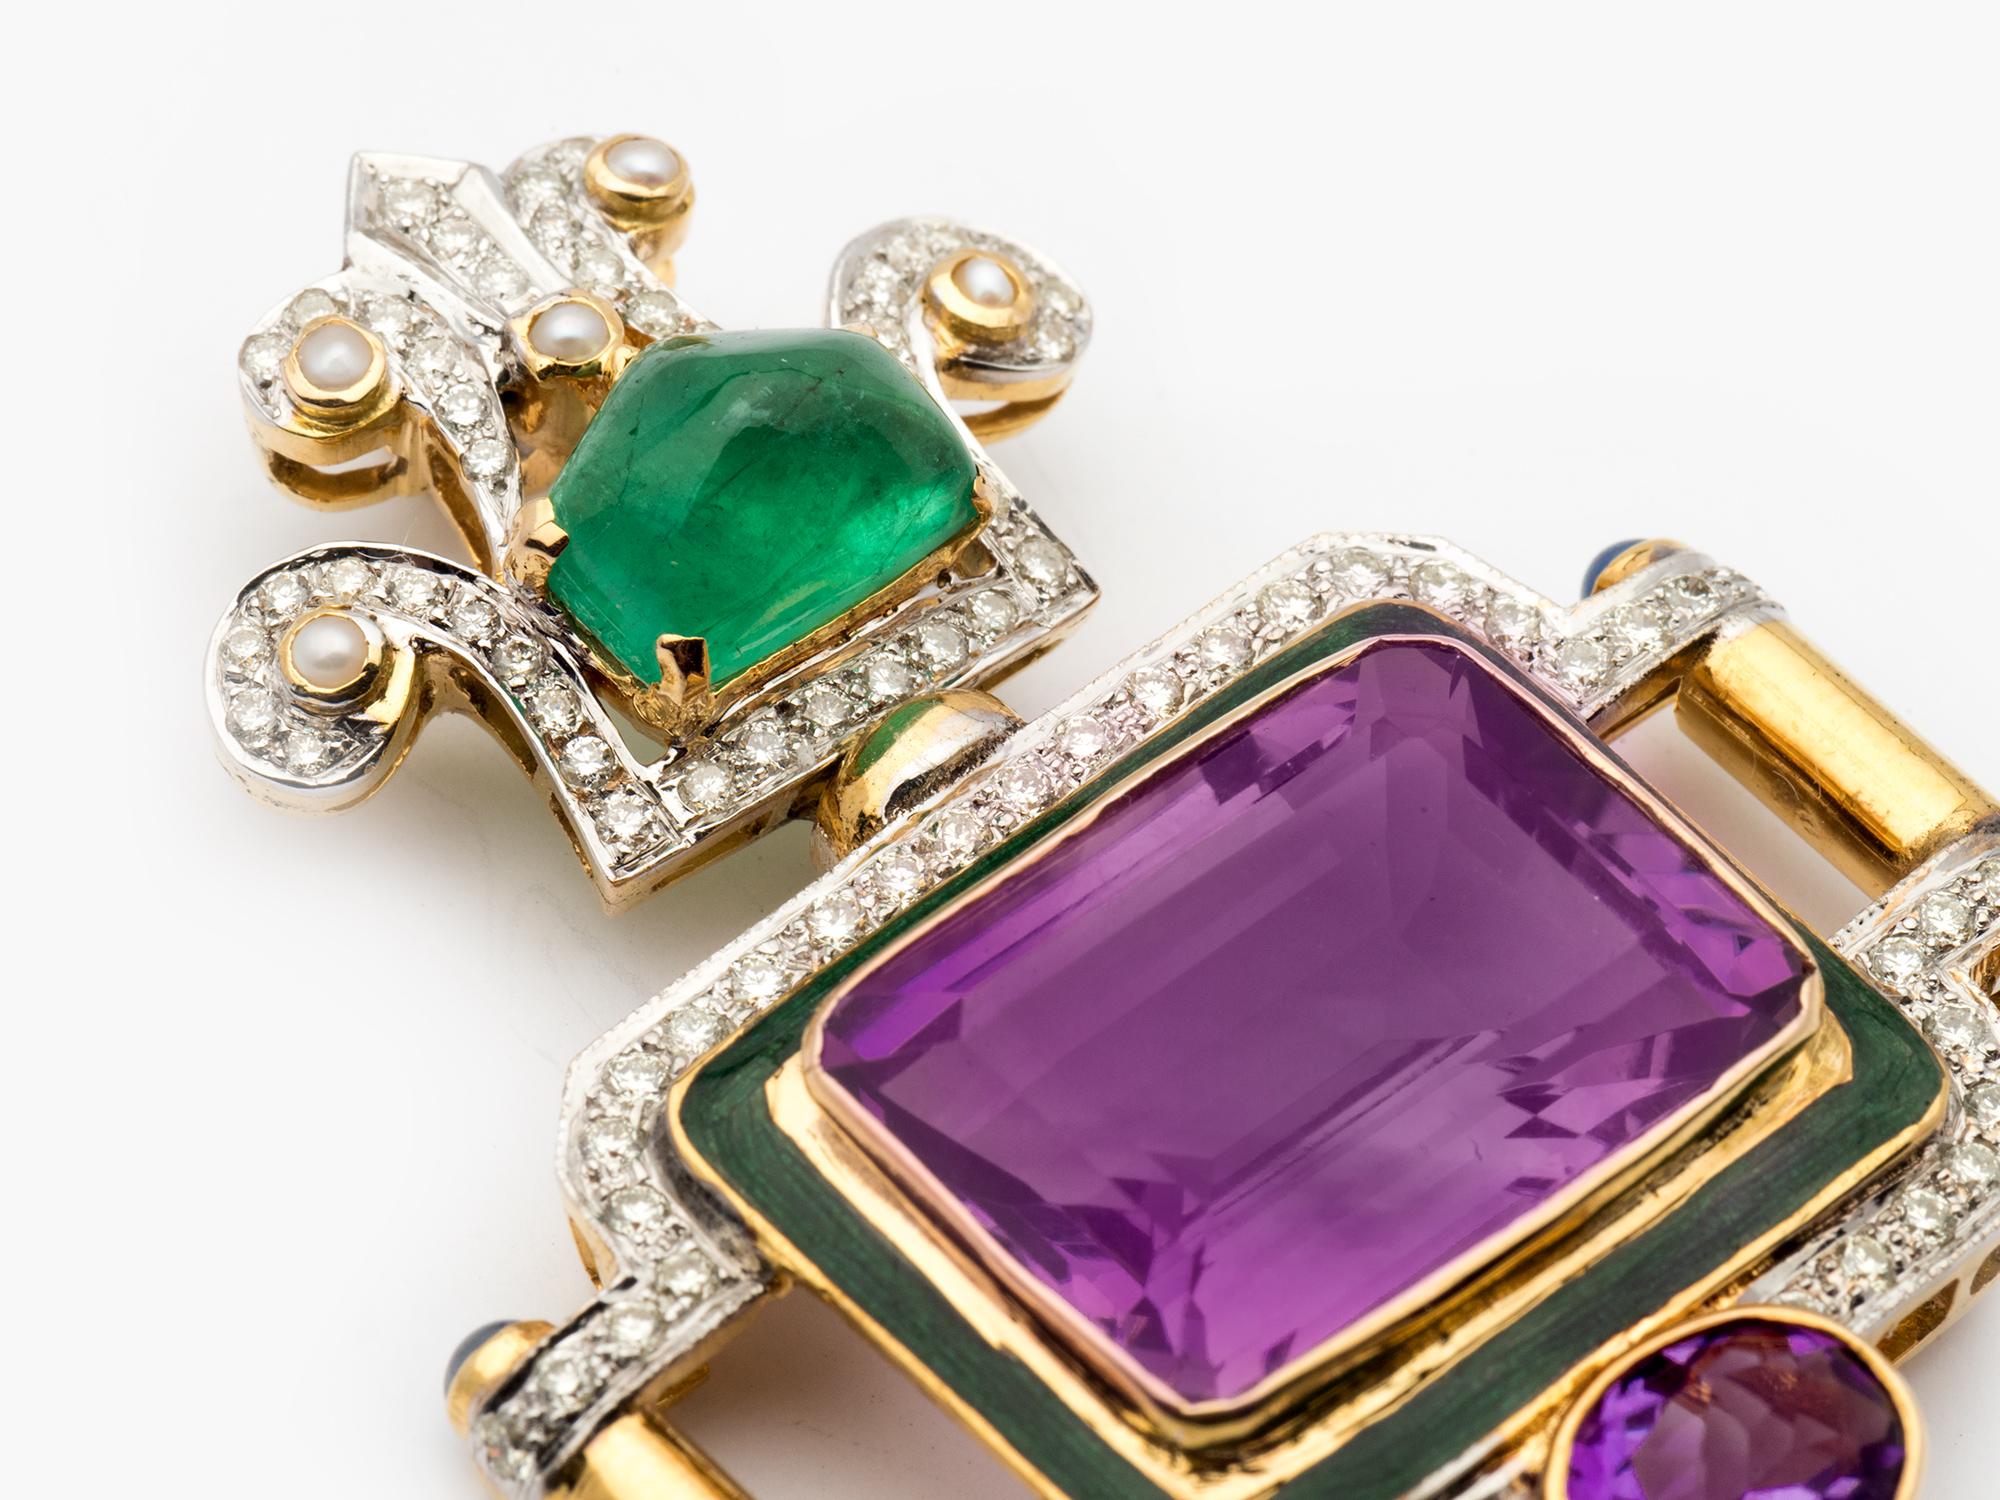 This unique pendant features an emerald cut amethyst weighing approximately 17.00 carats, set along with colored diamonds weighing approximately 1.50cts, emerald cabochons, sapphire cabochons and seed pearls accented with enamel.